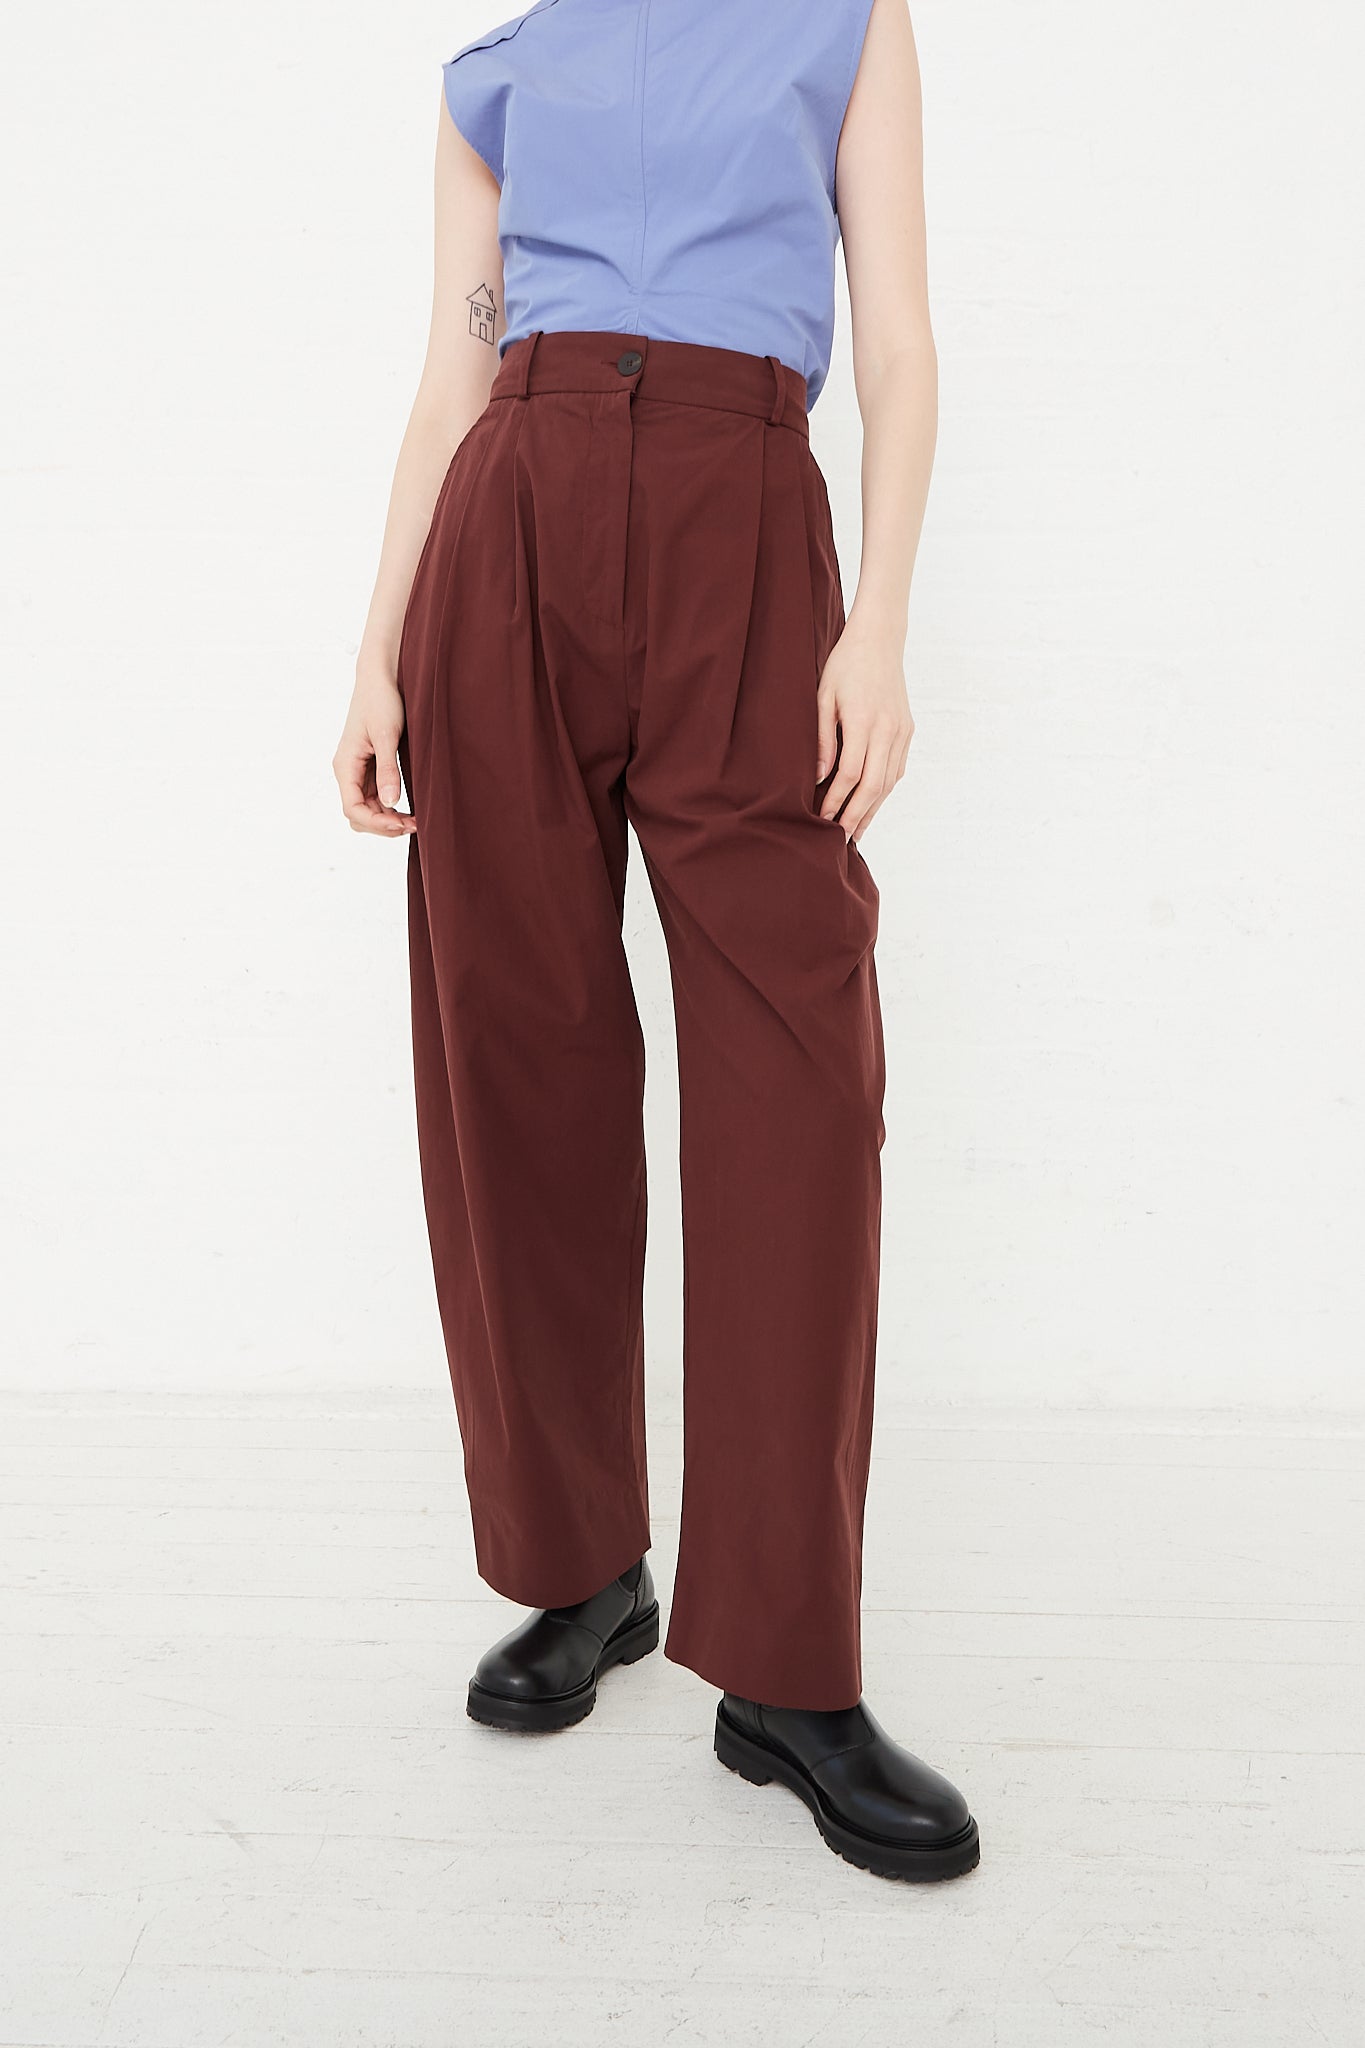 Studio Nicholson Acuna Pant in Compote front view